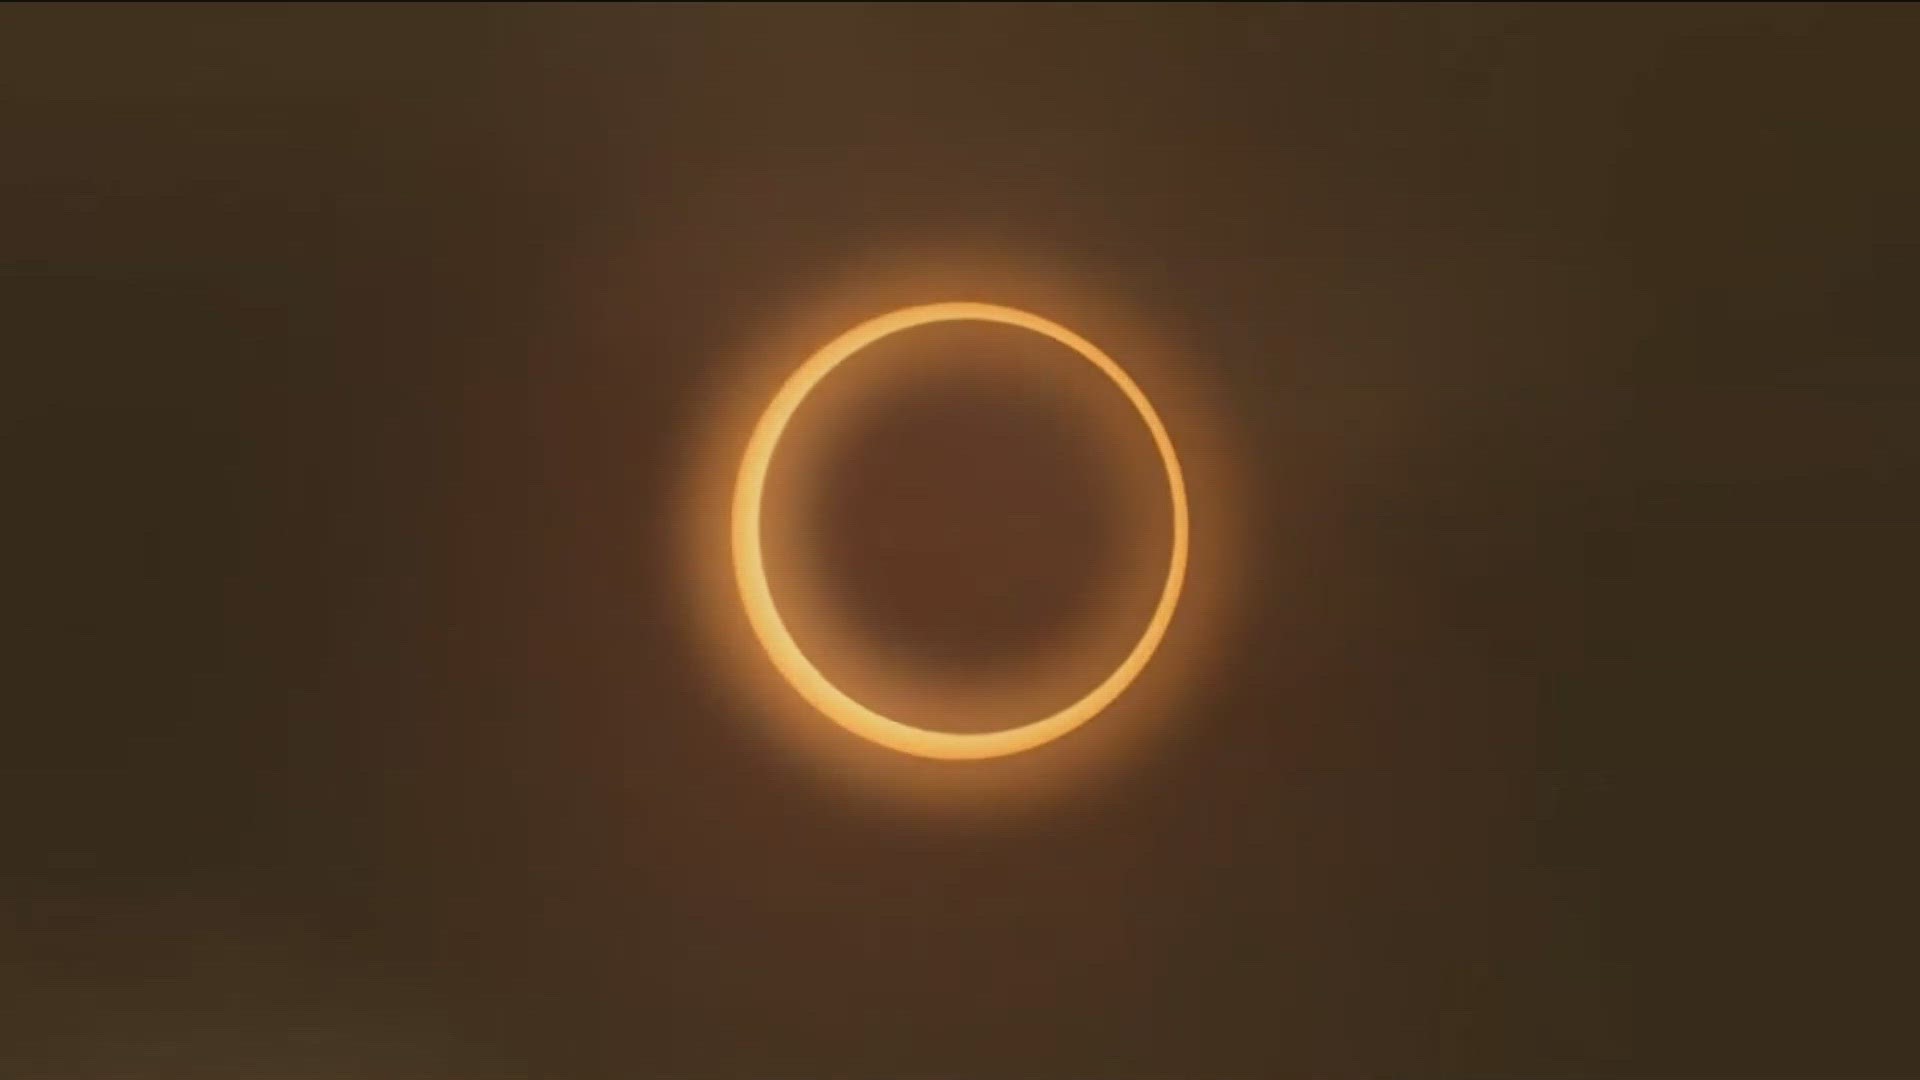 Annular solar eclipse 2023: How to see 'ring of fire